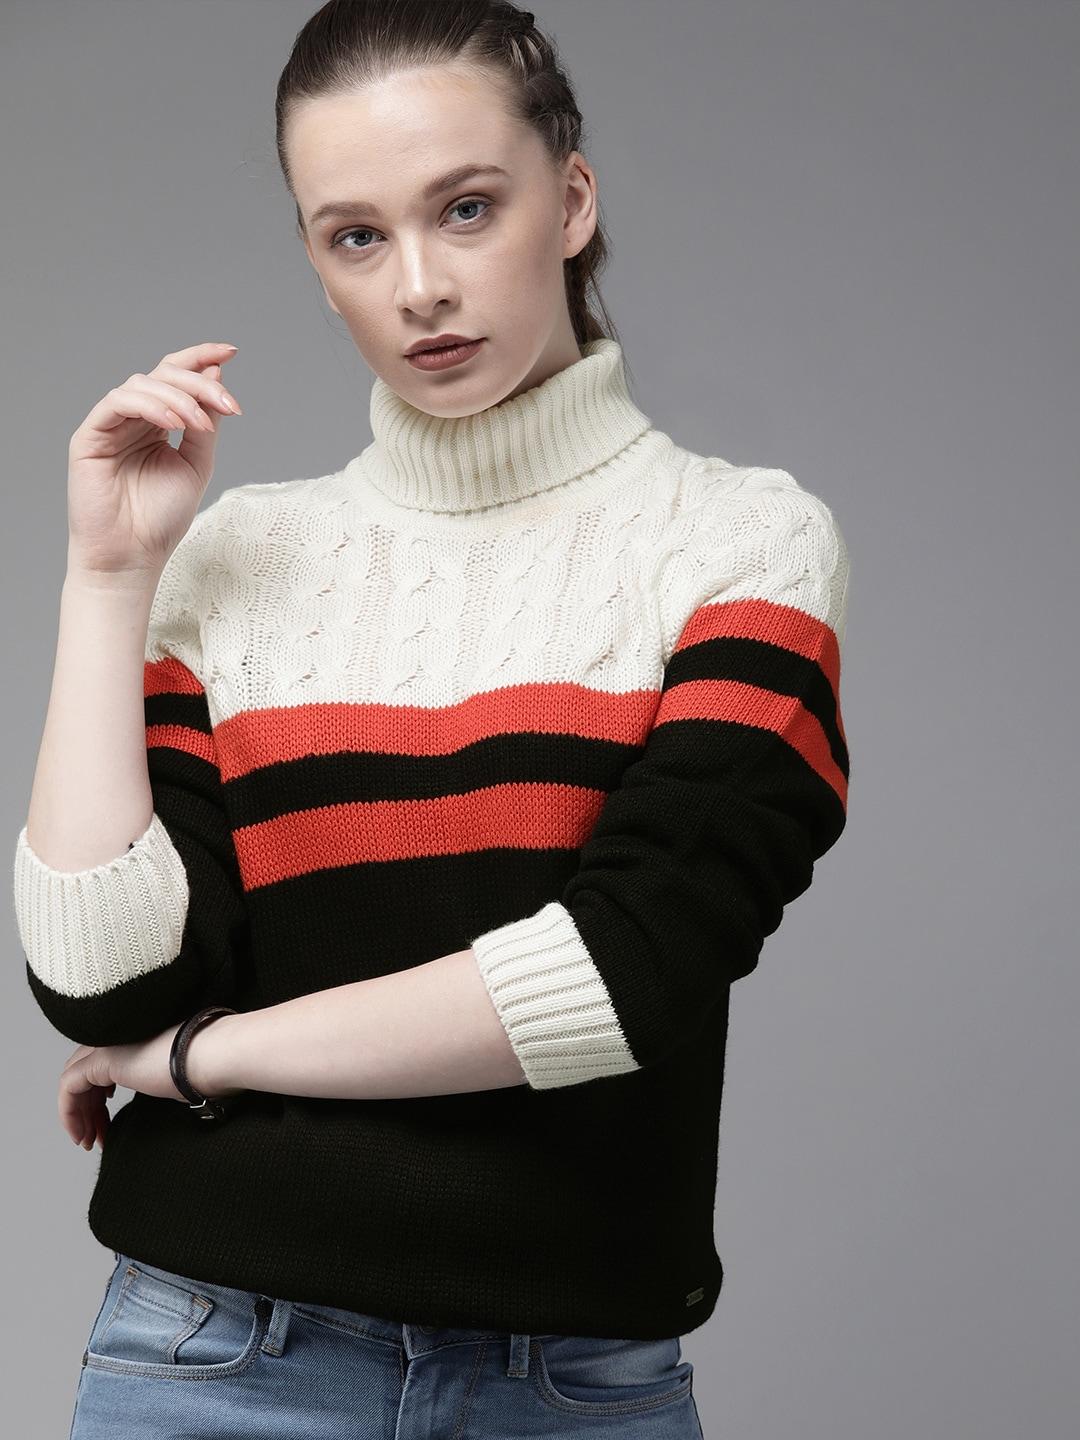 The Roadster Lifestyle Co Women Black & Red Colourblocked Sweater